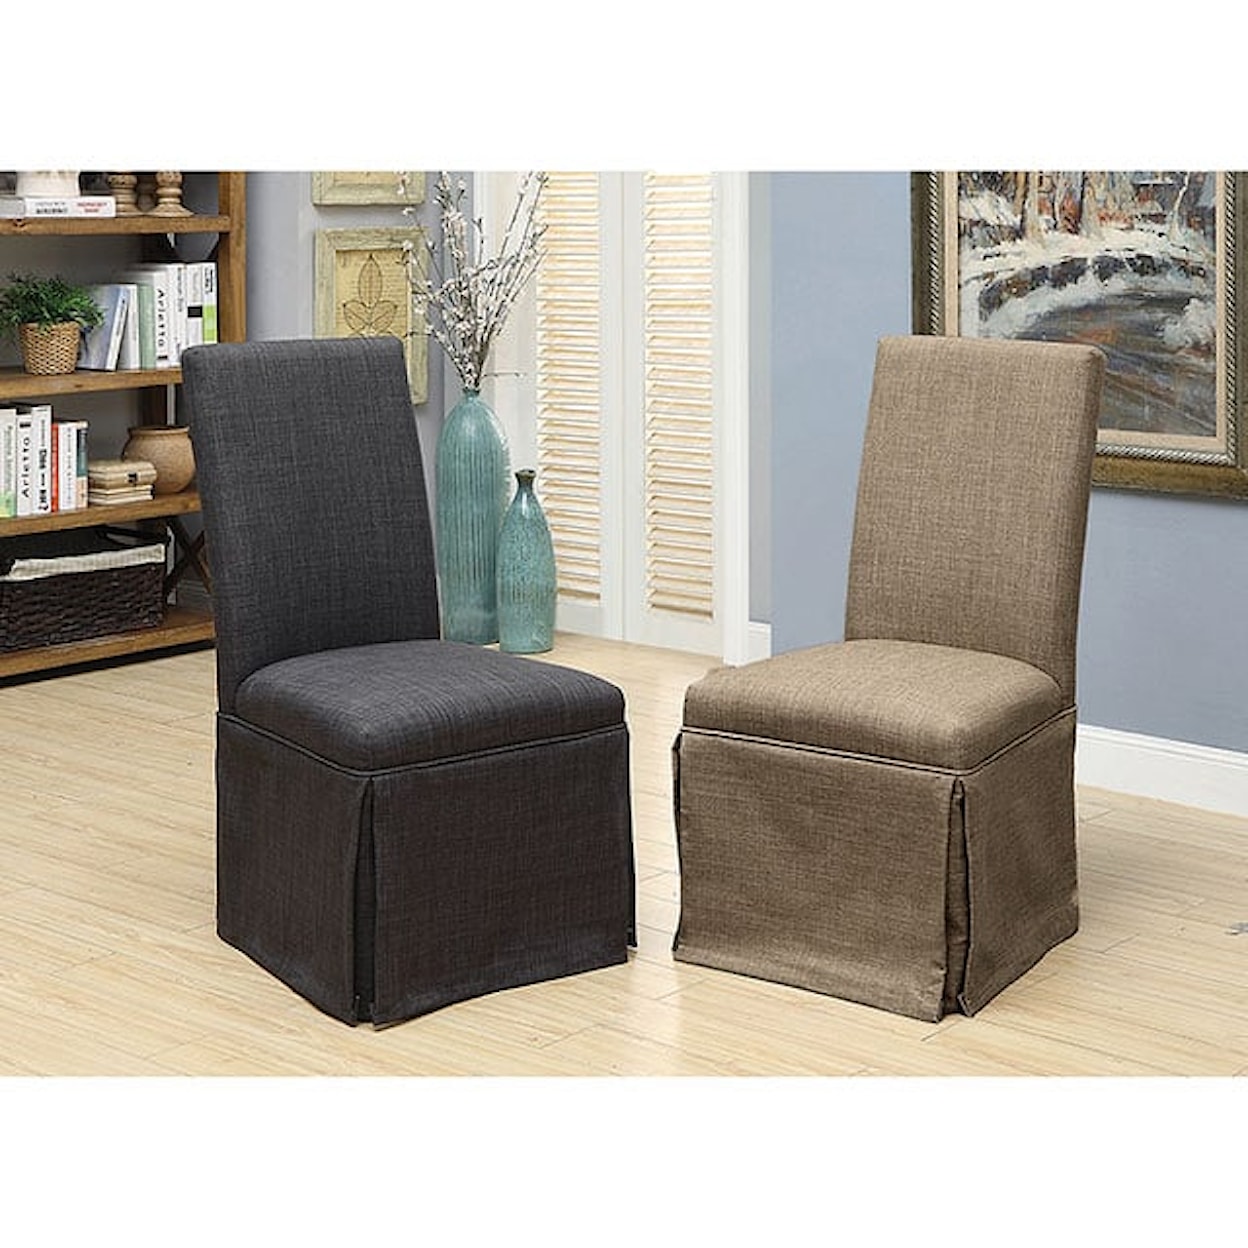 Furniture of America Kortrijk  Skirted Accent Chairs with Welting Trim